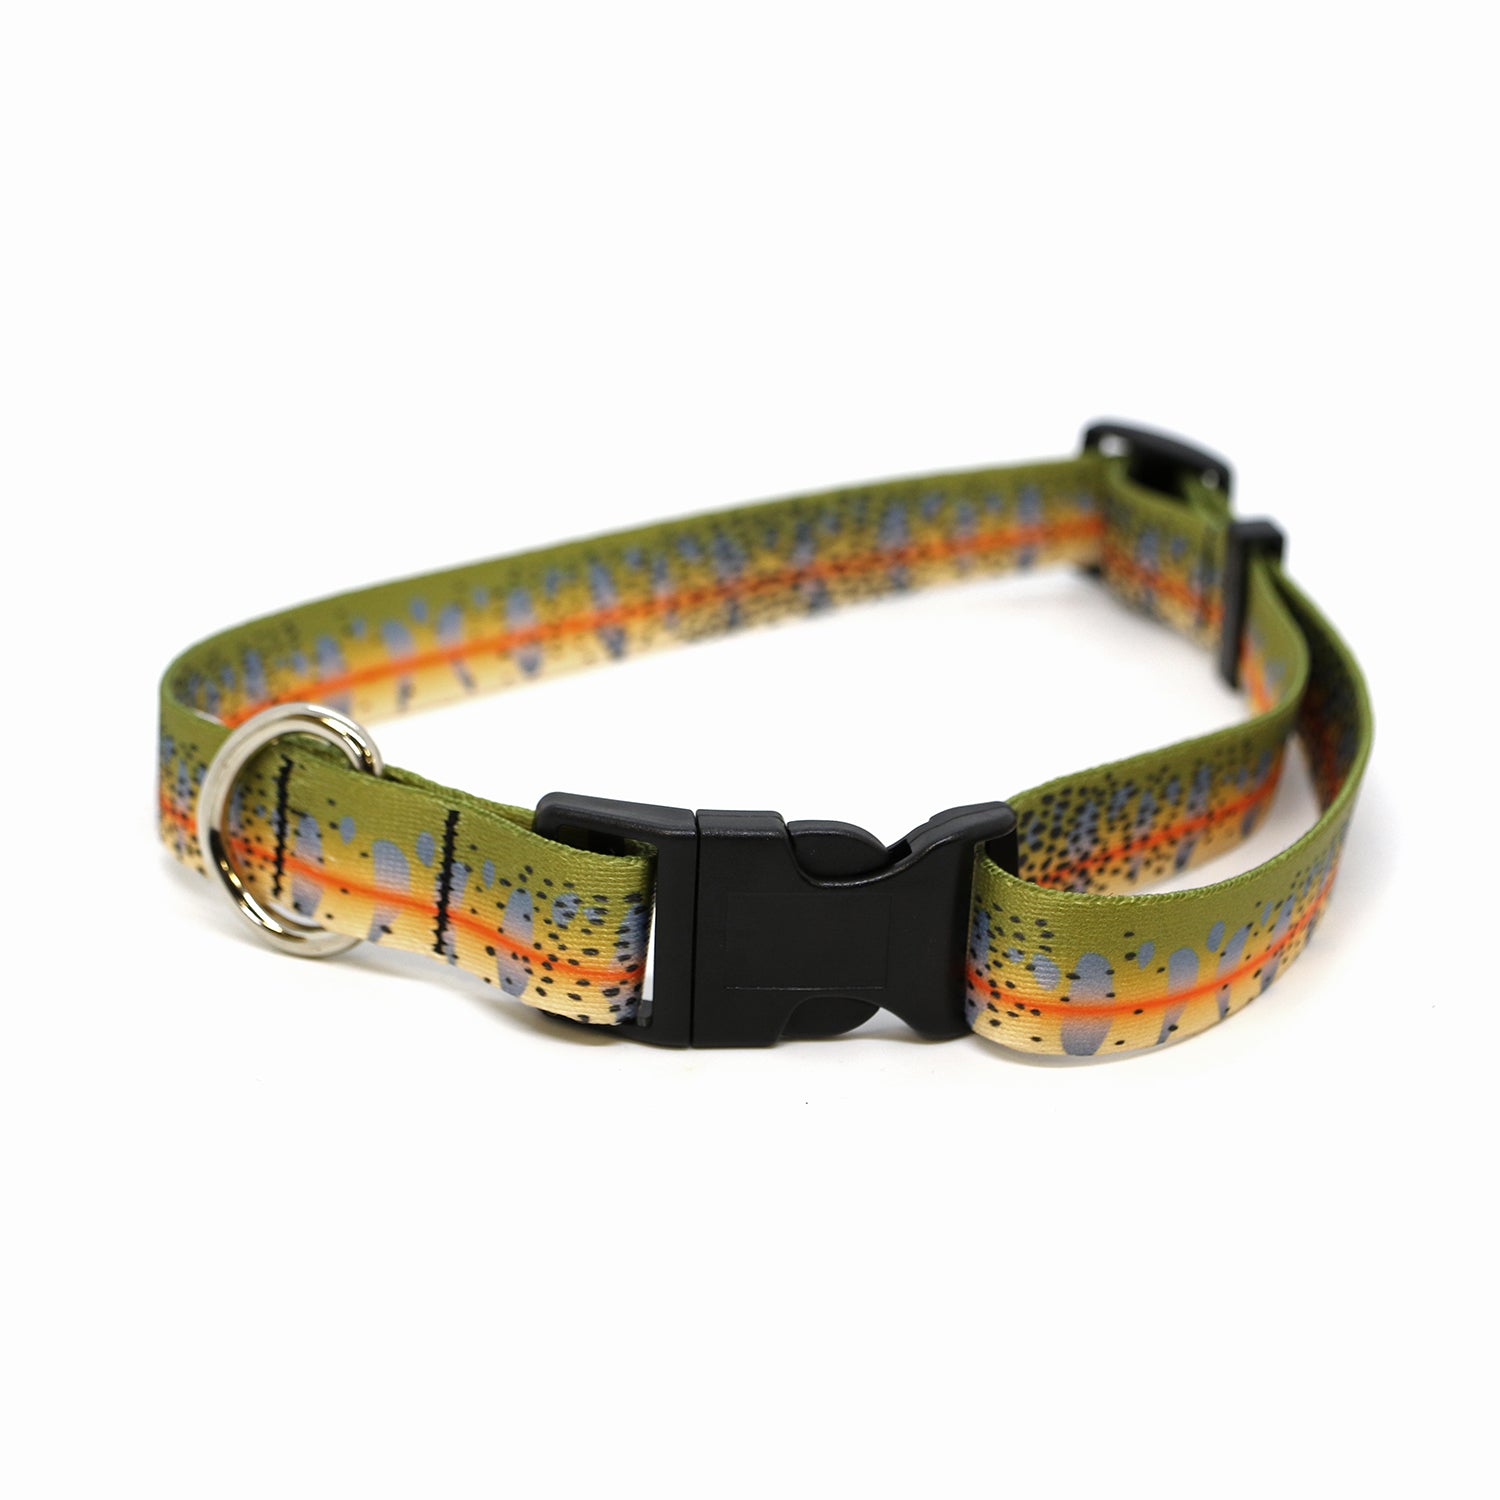 A dog collar with a black plastic clip and metal ring has the pattern of a cutthroat trout printed on it.